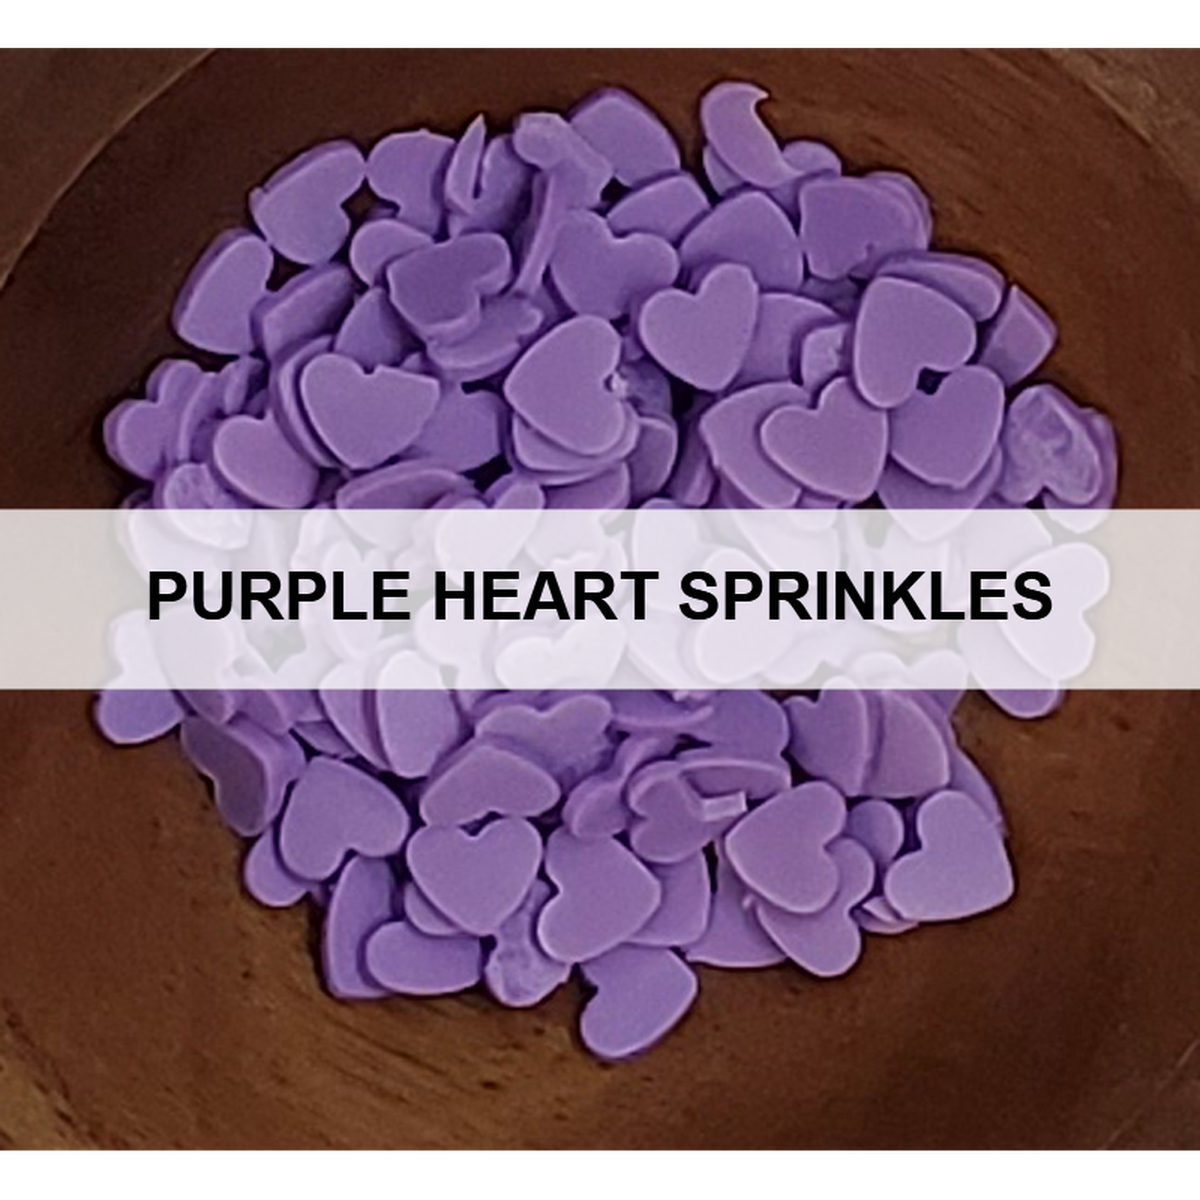 Purple Heart Sprinkles by Kat Scrappiness - Kat Scrappiness